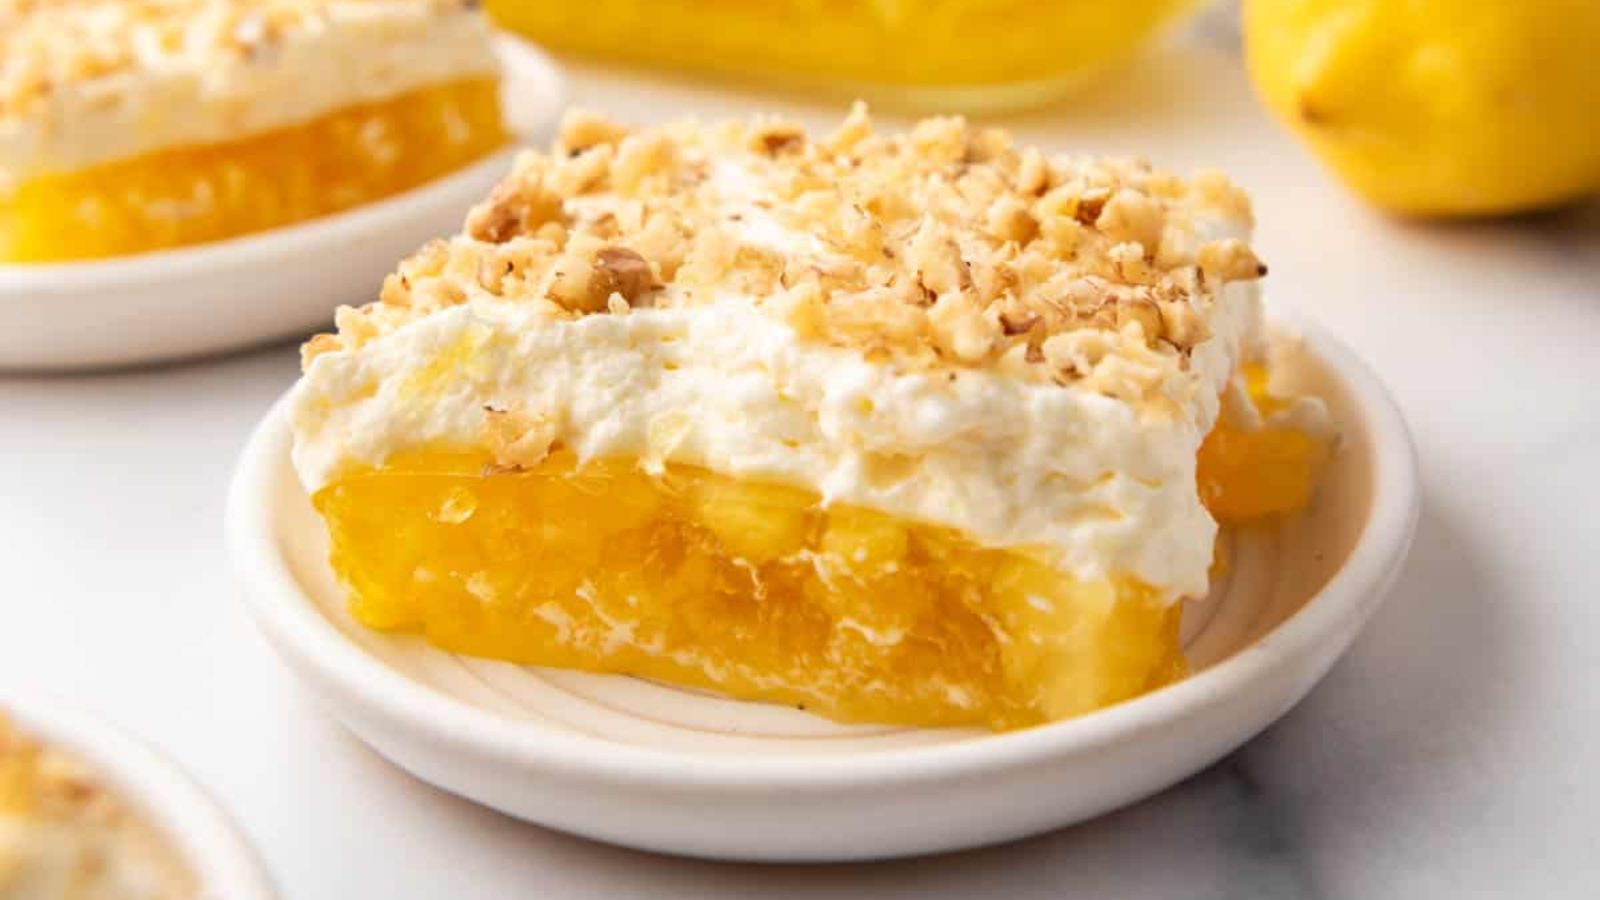 Lemon Pineapple Jell-O with Pineapple Whipped Cream Topping